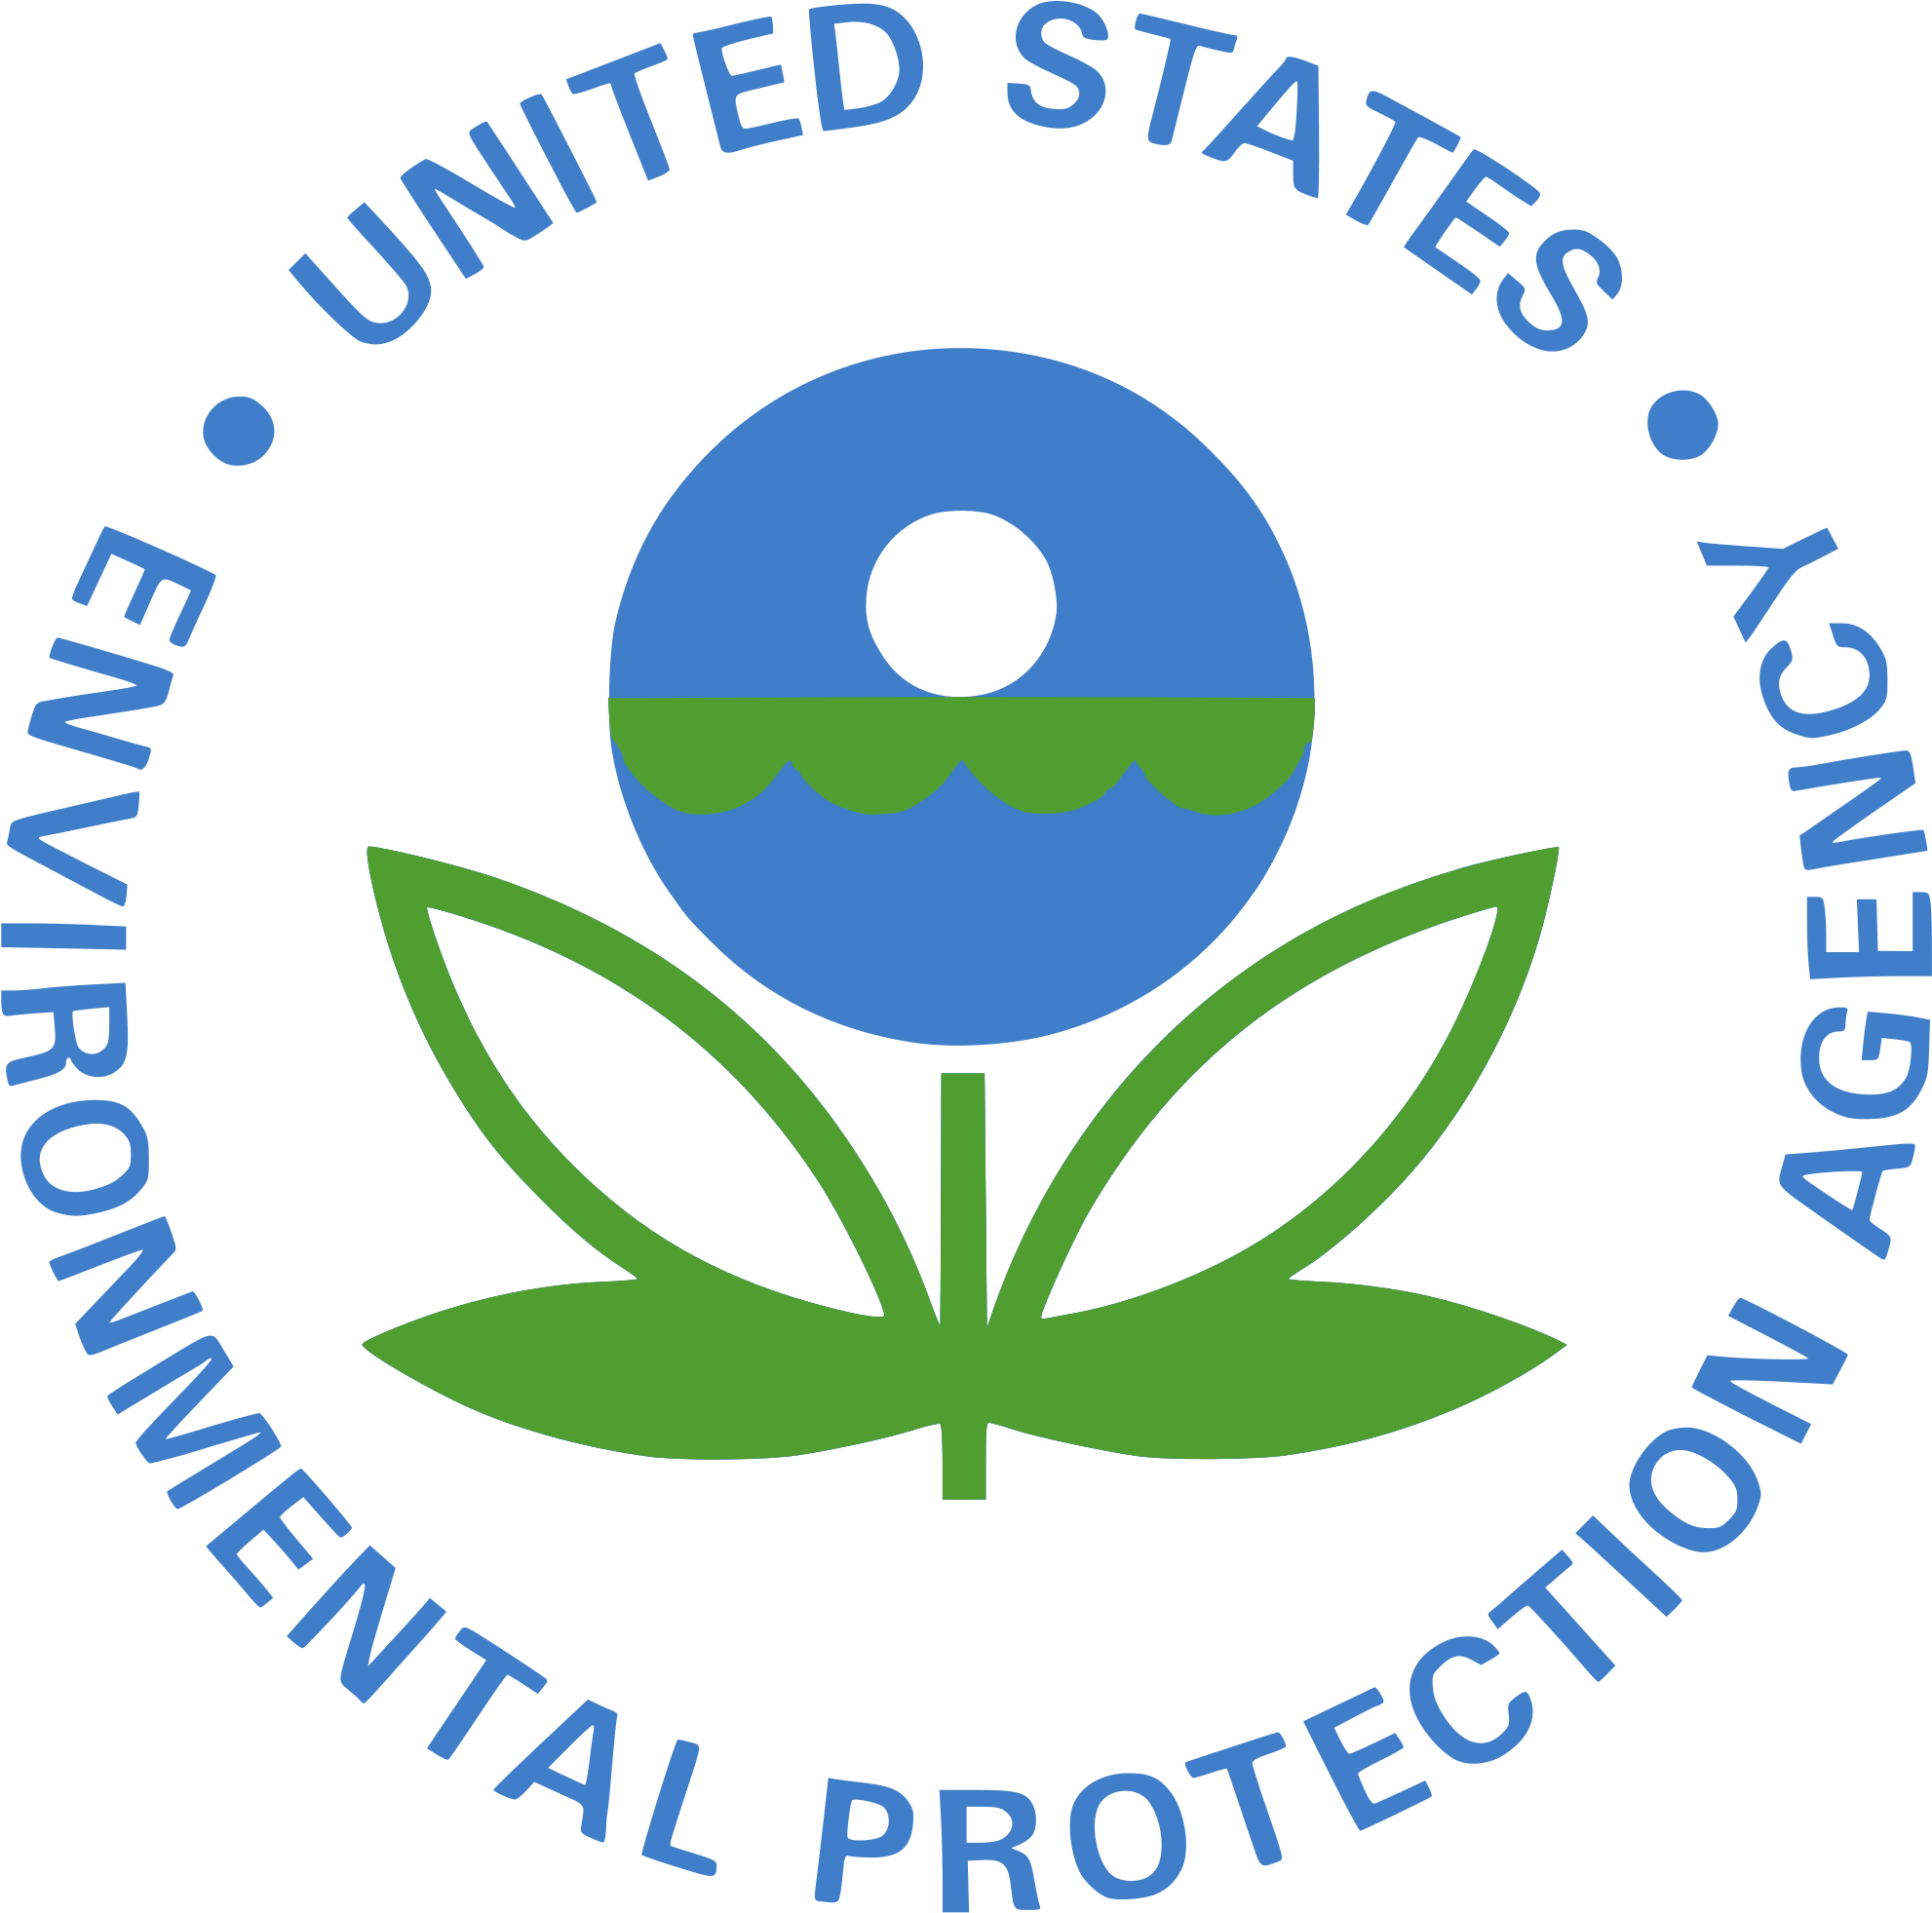 Epa Fy 2019 Budget Proposal From Administrator Pruitt - United States Environmental Protection Agency (2000x1980)